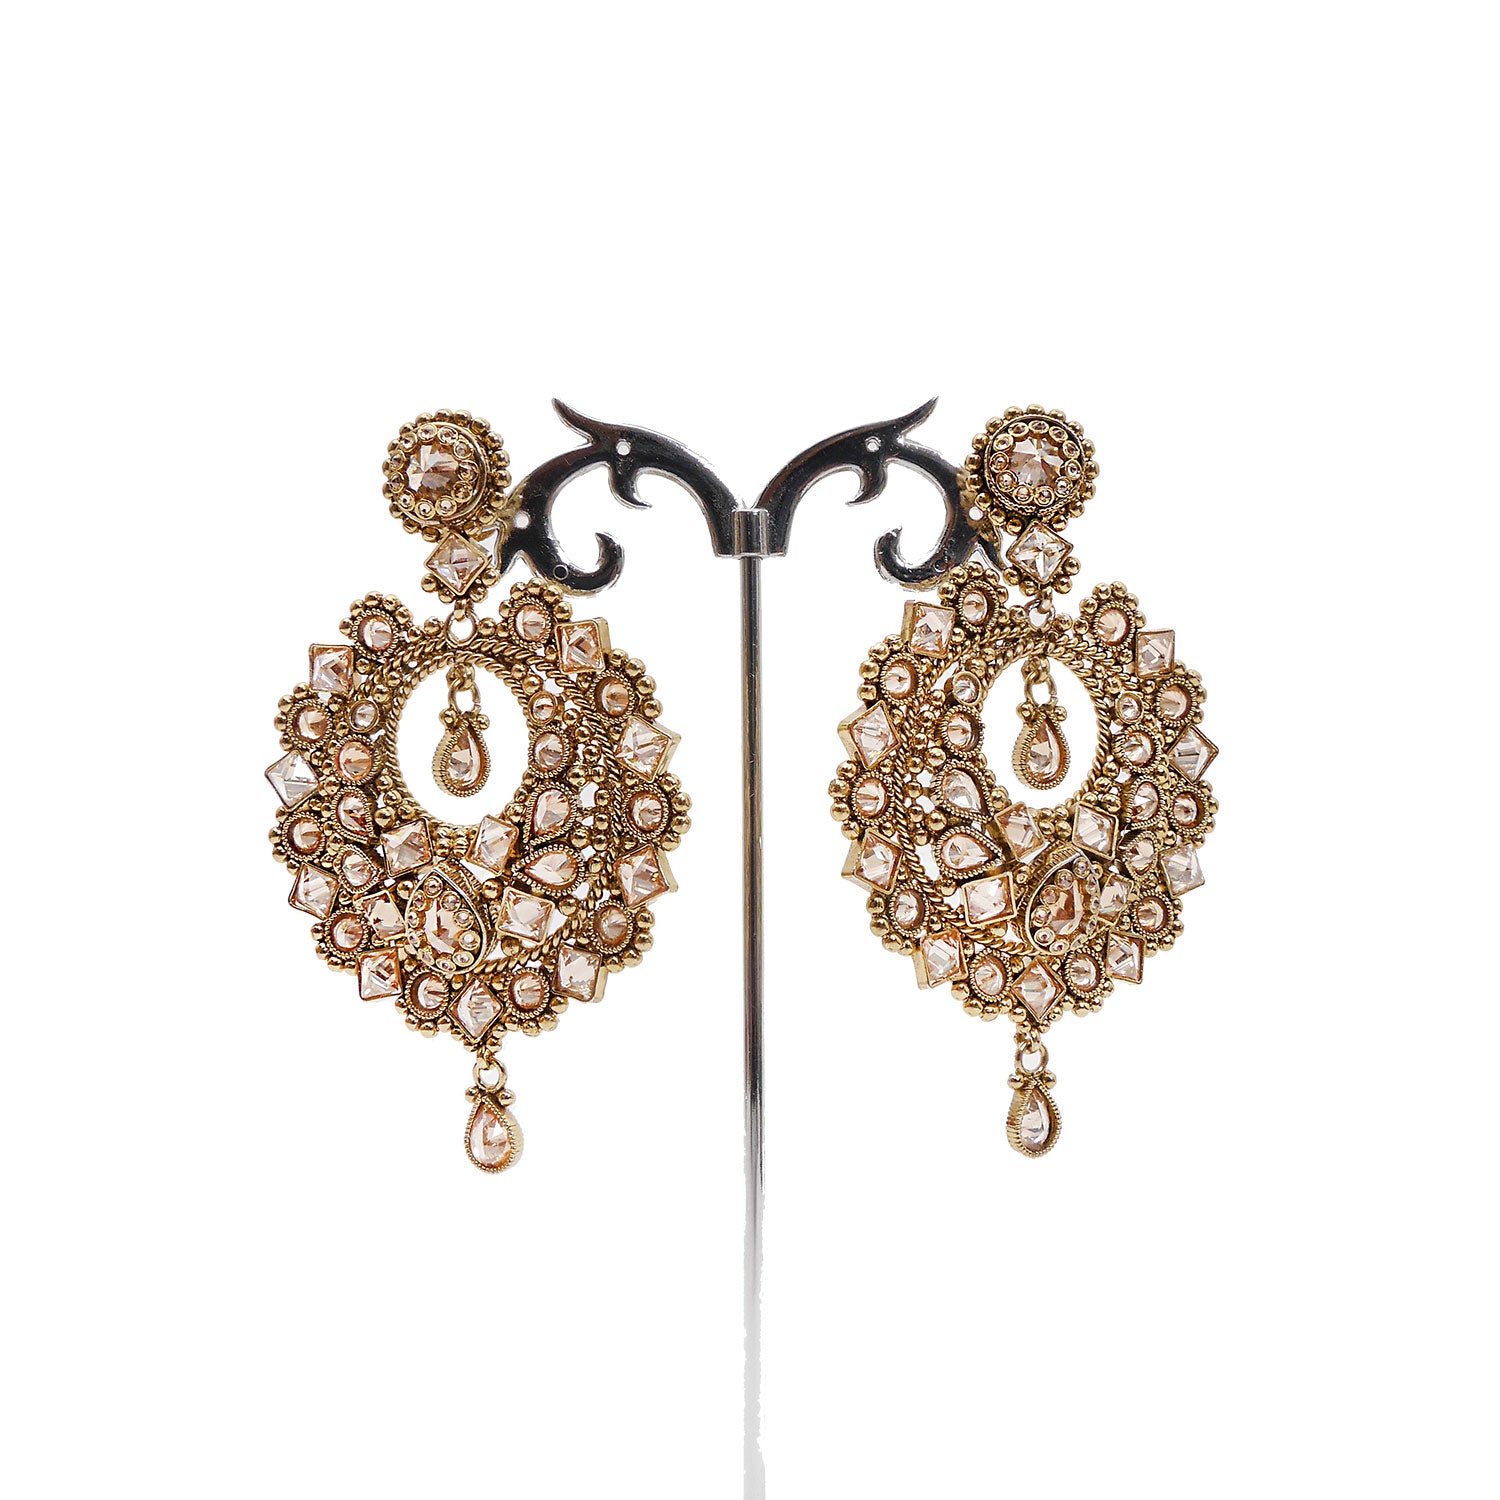 Arya Chandbali Earrings in Pearl and Antique Gold